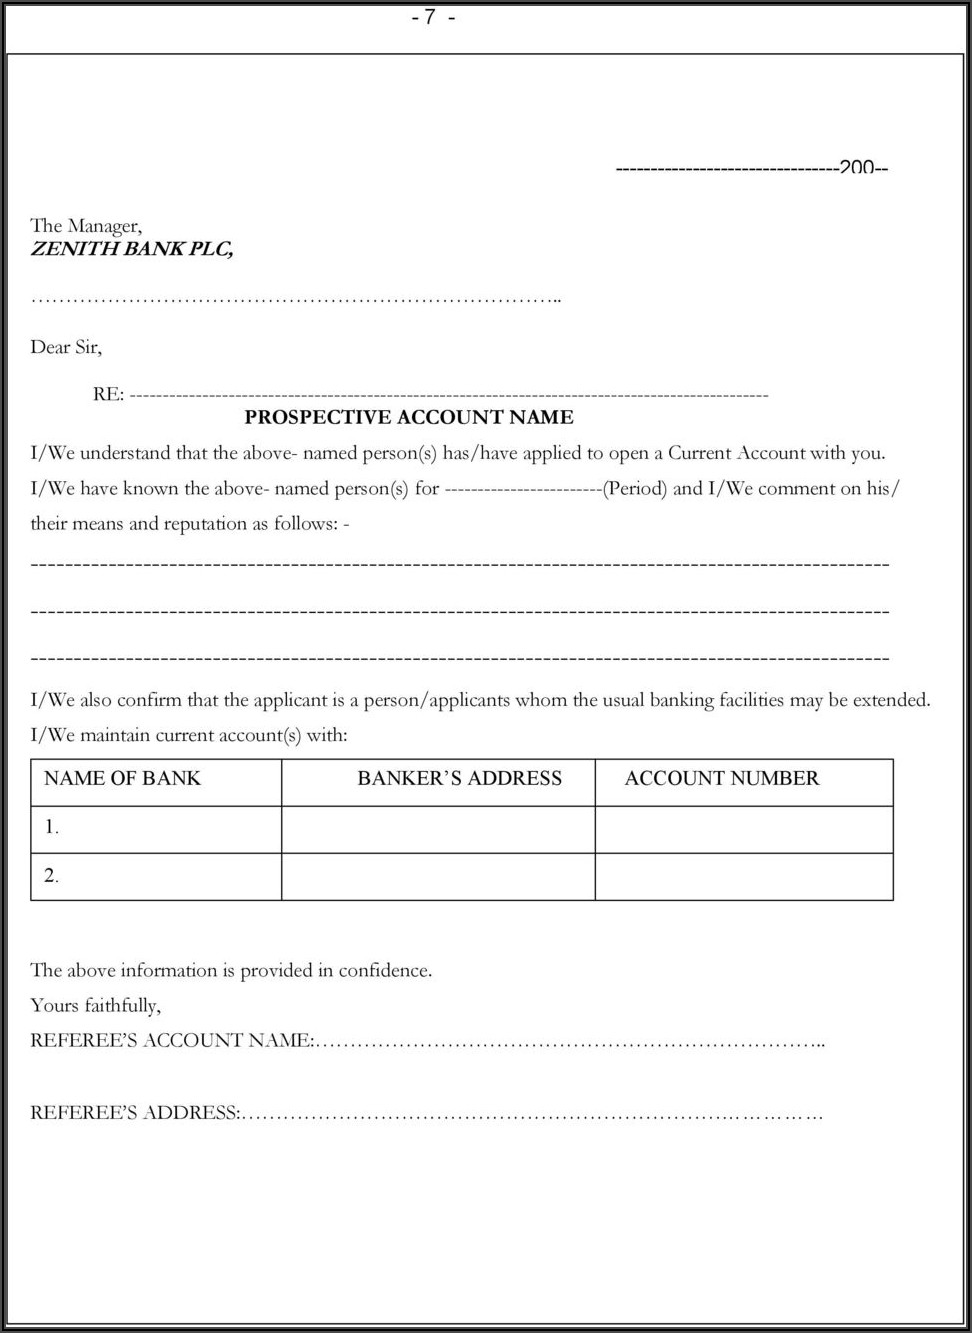 Zenith Bank Corporate Account Opening Form Pdf